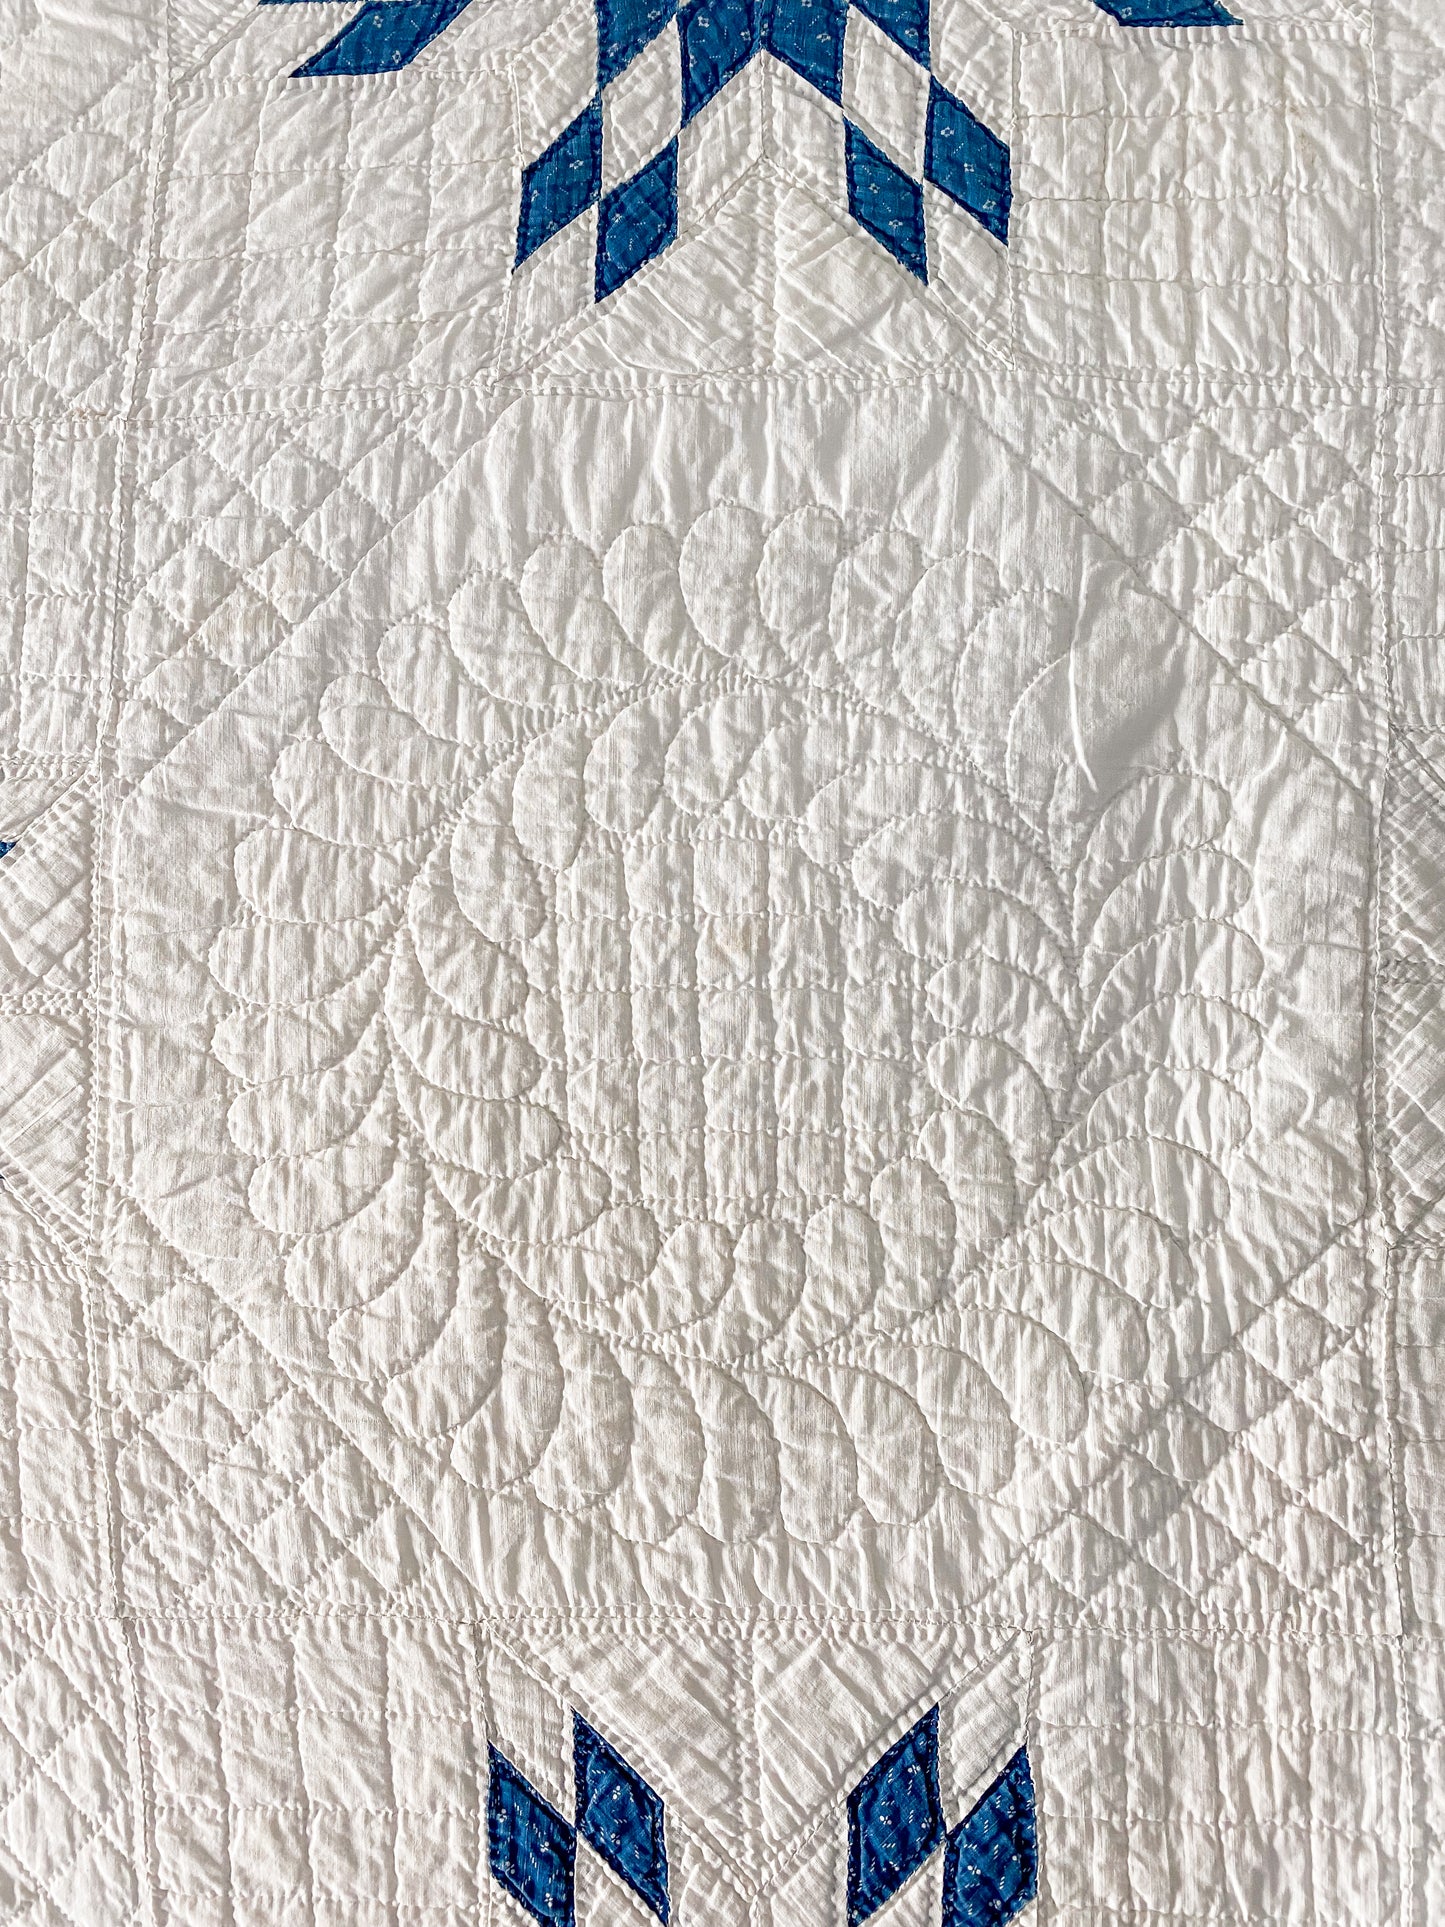 Vintage Blue and White Blazing Star Quilt, c1920s Crafting Textile, 83" x 73"